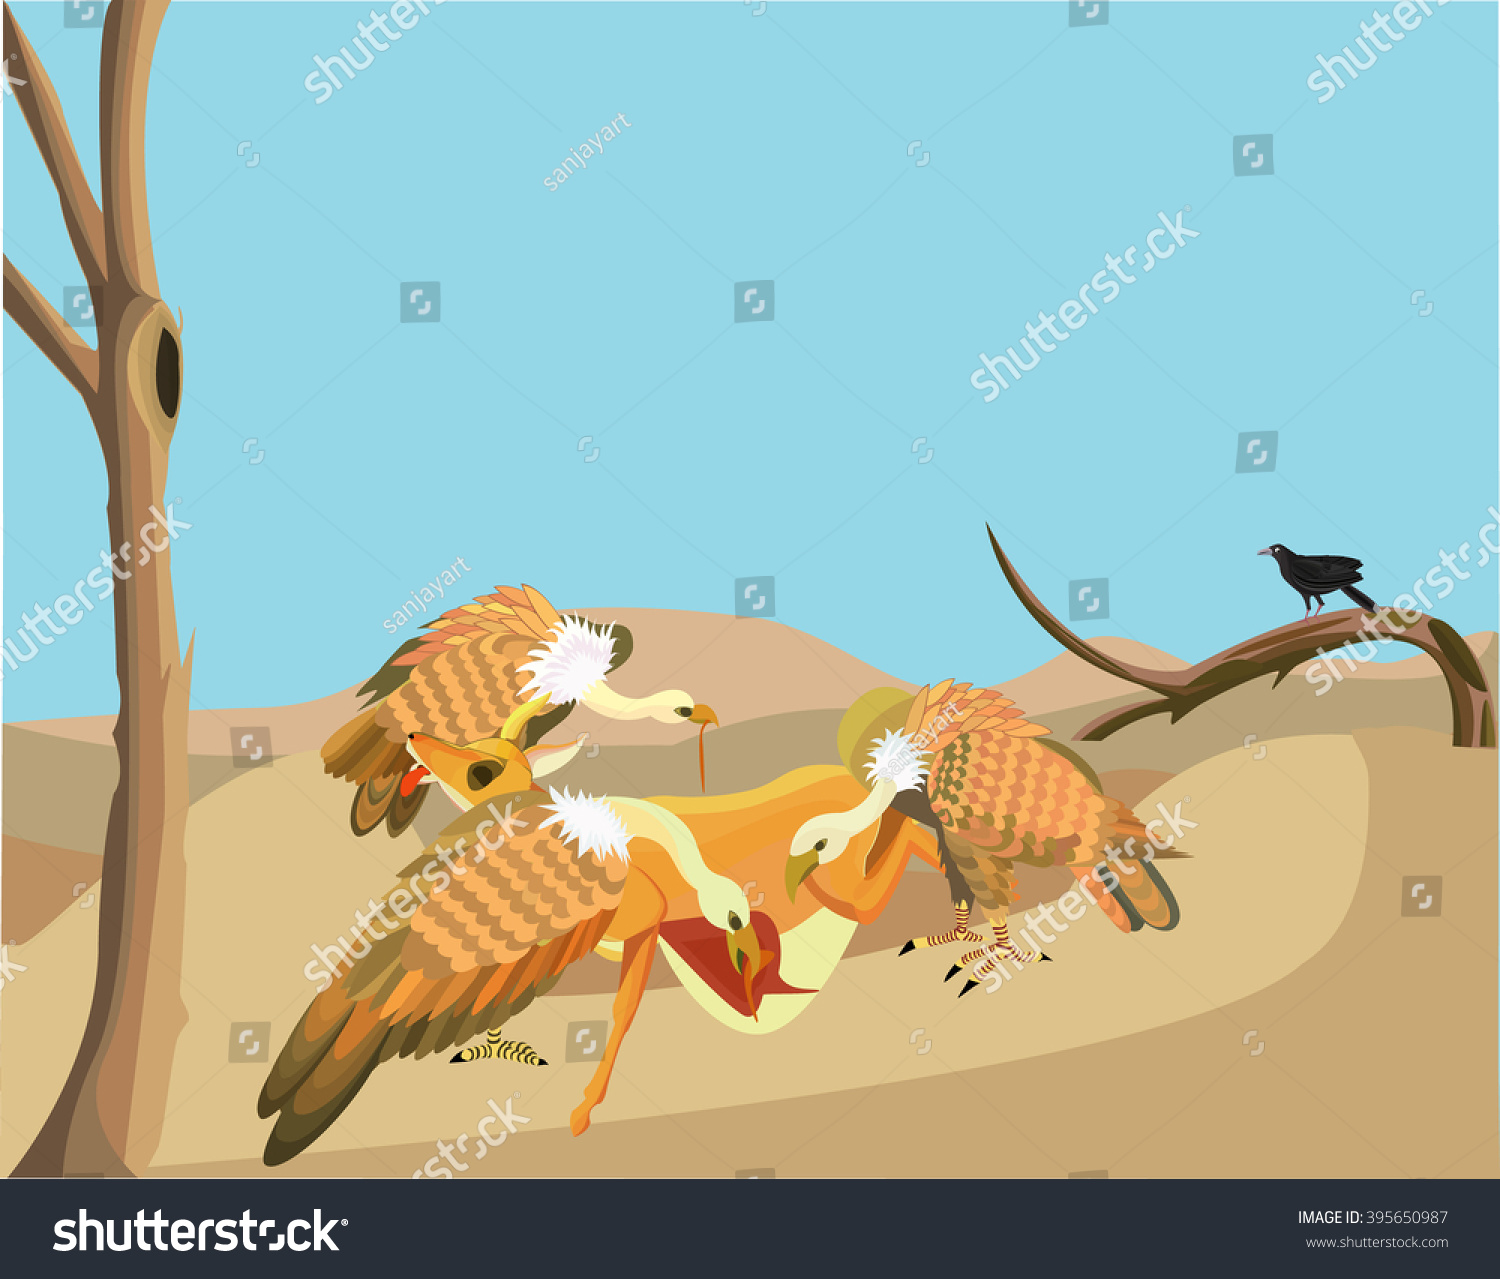 Scavengers Vulture Eat Dead Animal All Stock Vector Royalty Free ...